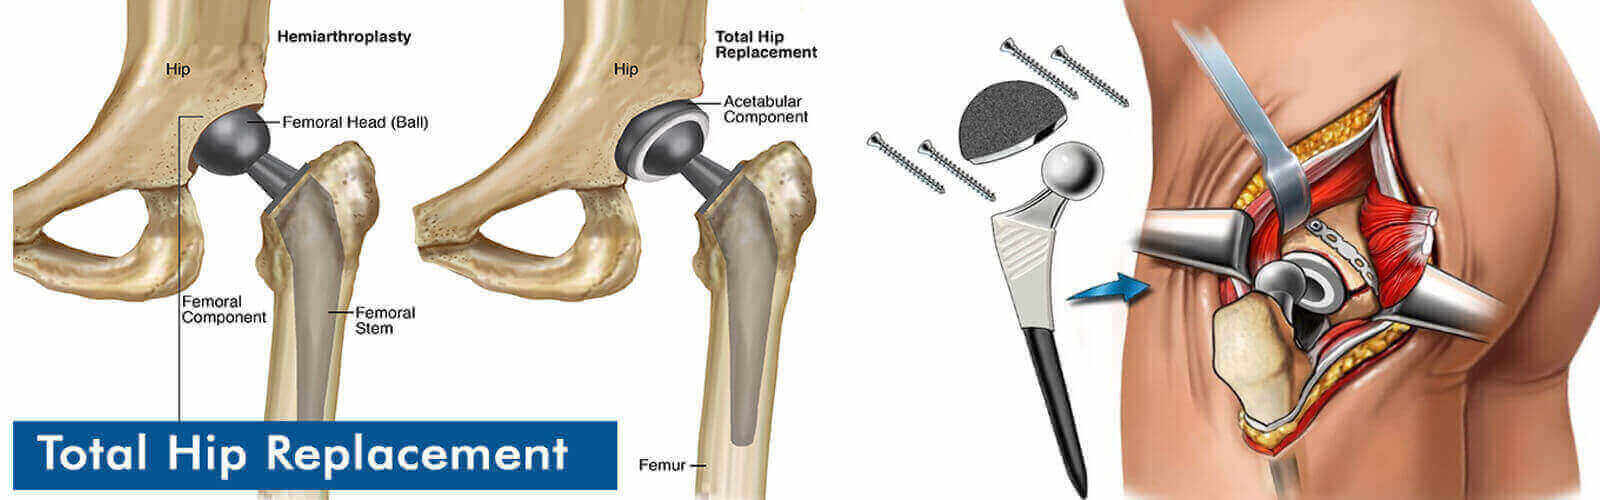 Hip Replacement Surgery Or Hip Resurfacing in Us